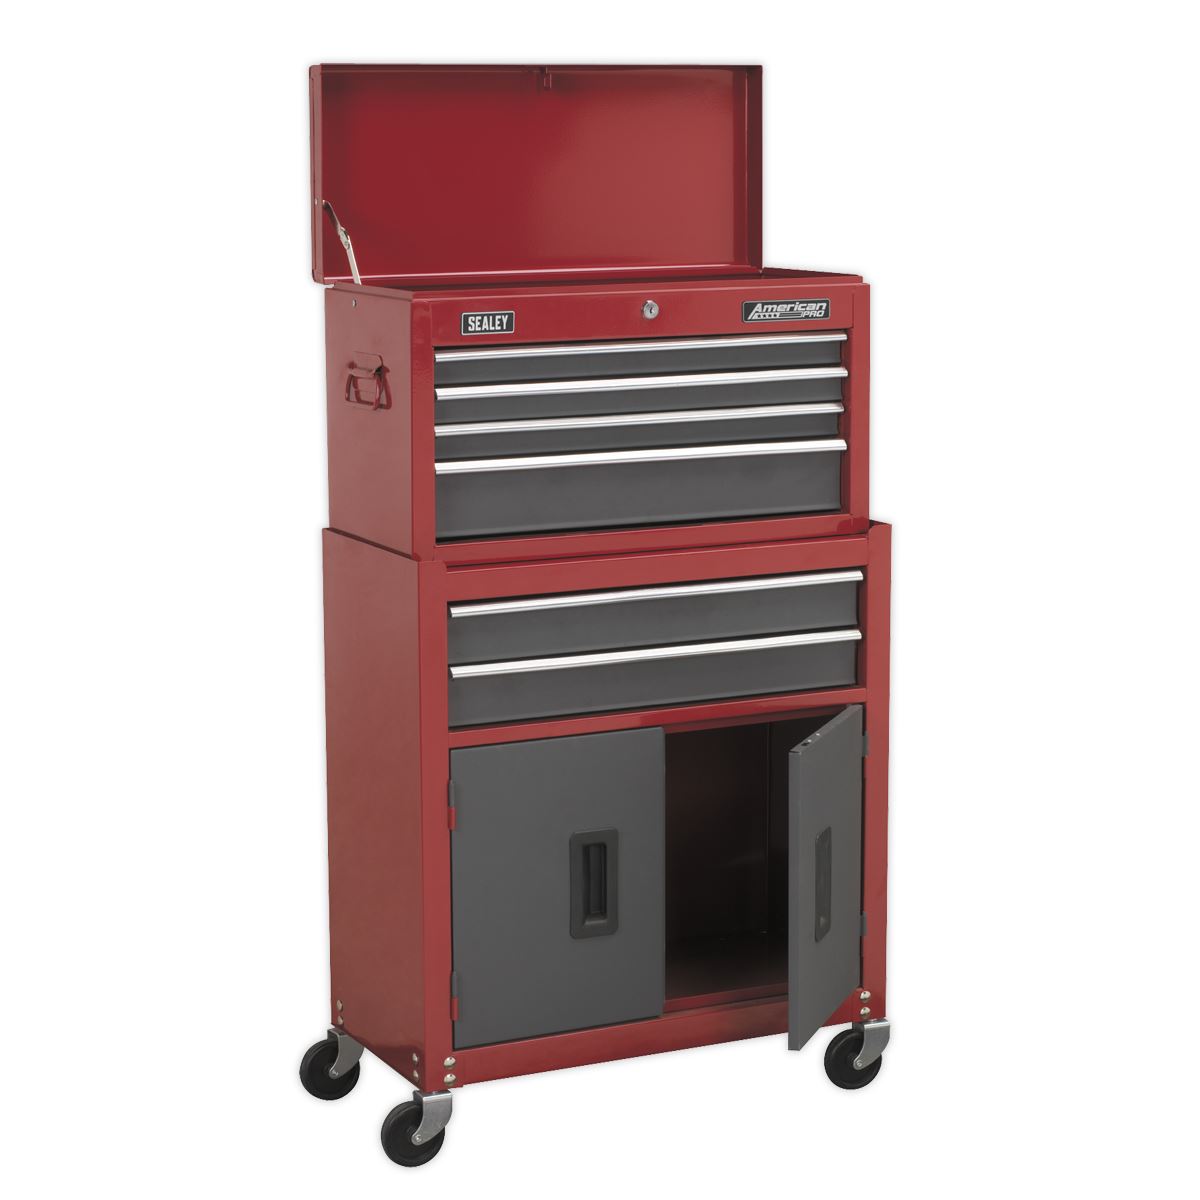 Sealey American Pro Topchest & Rollcab Combination 6 Drawer with Ball-Bearing Slides- Red